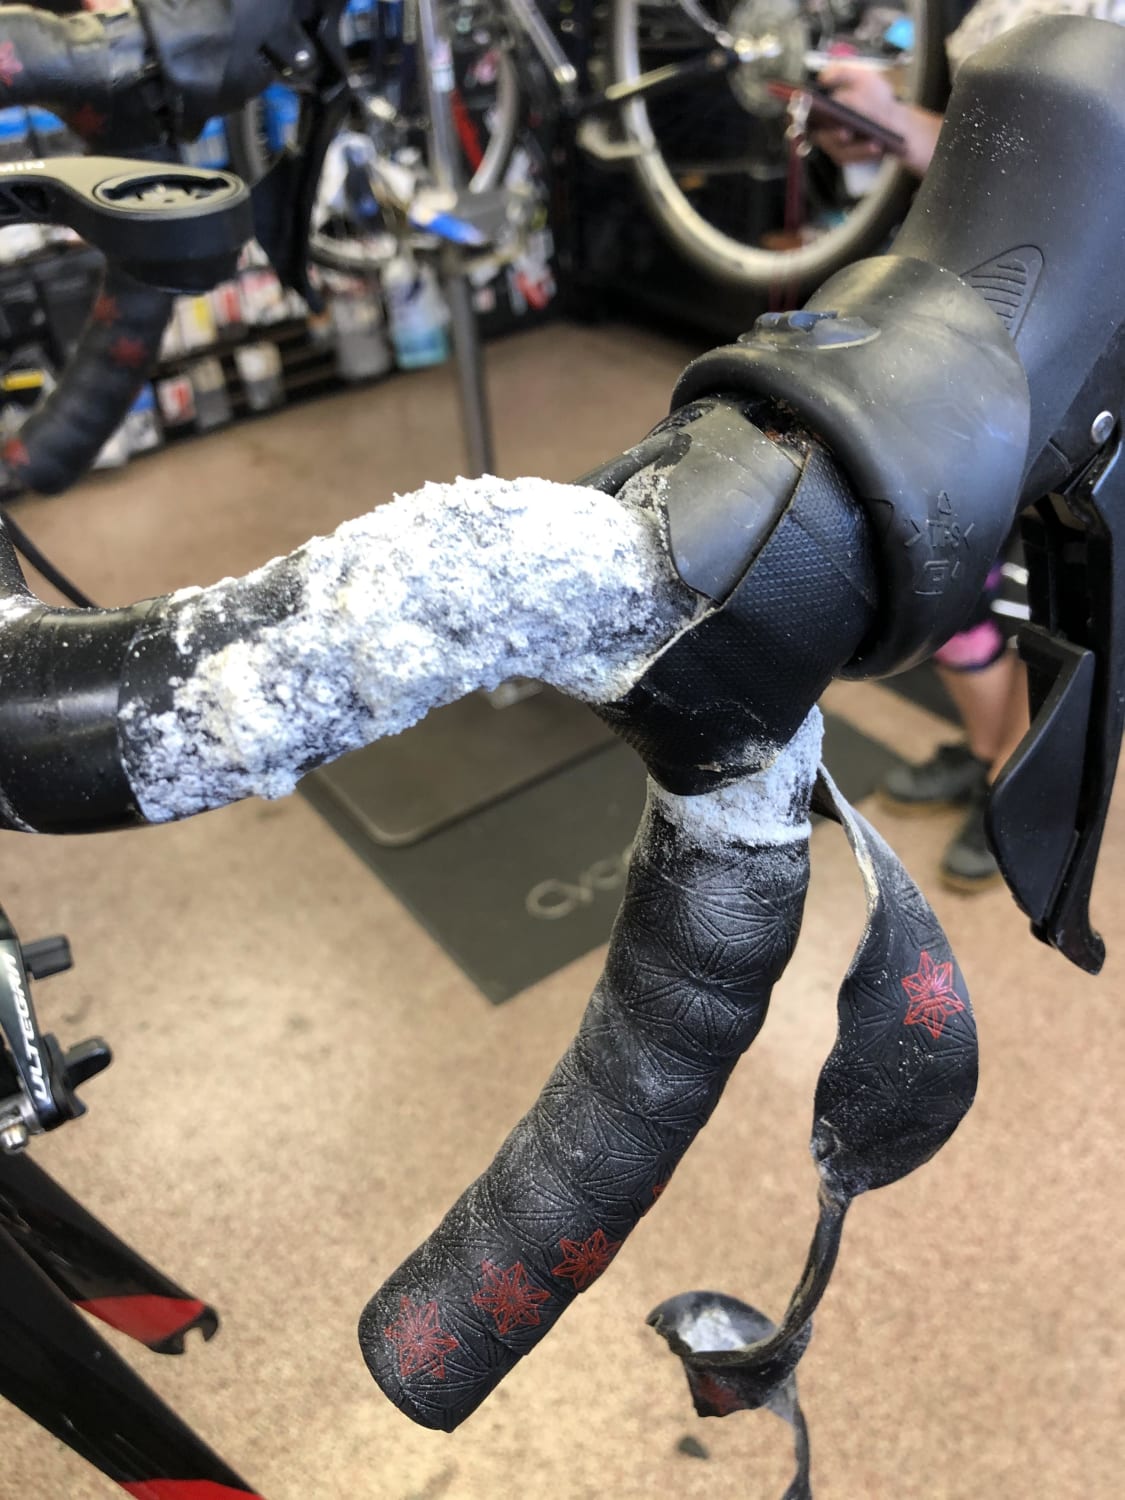 Been working at the bike shop for over 2 years.. never seen it this bad before